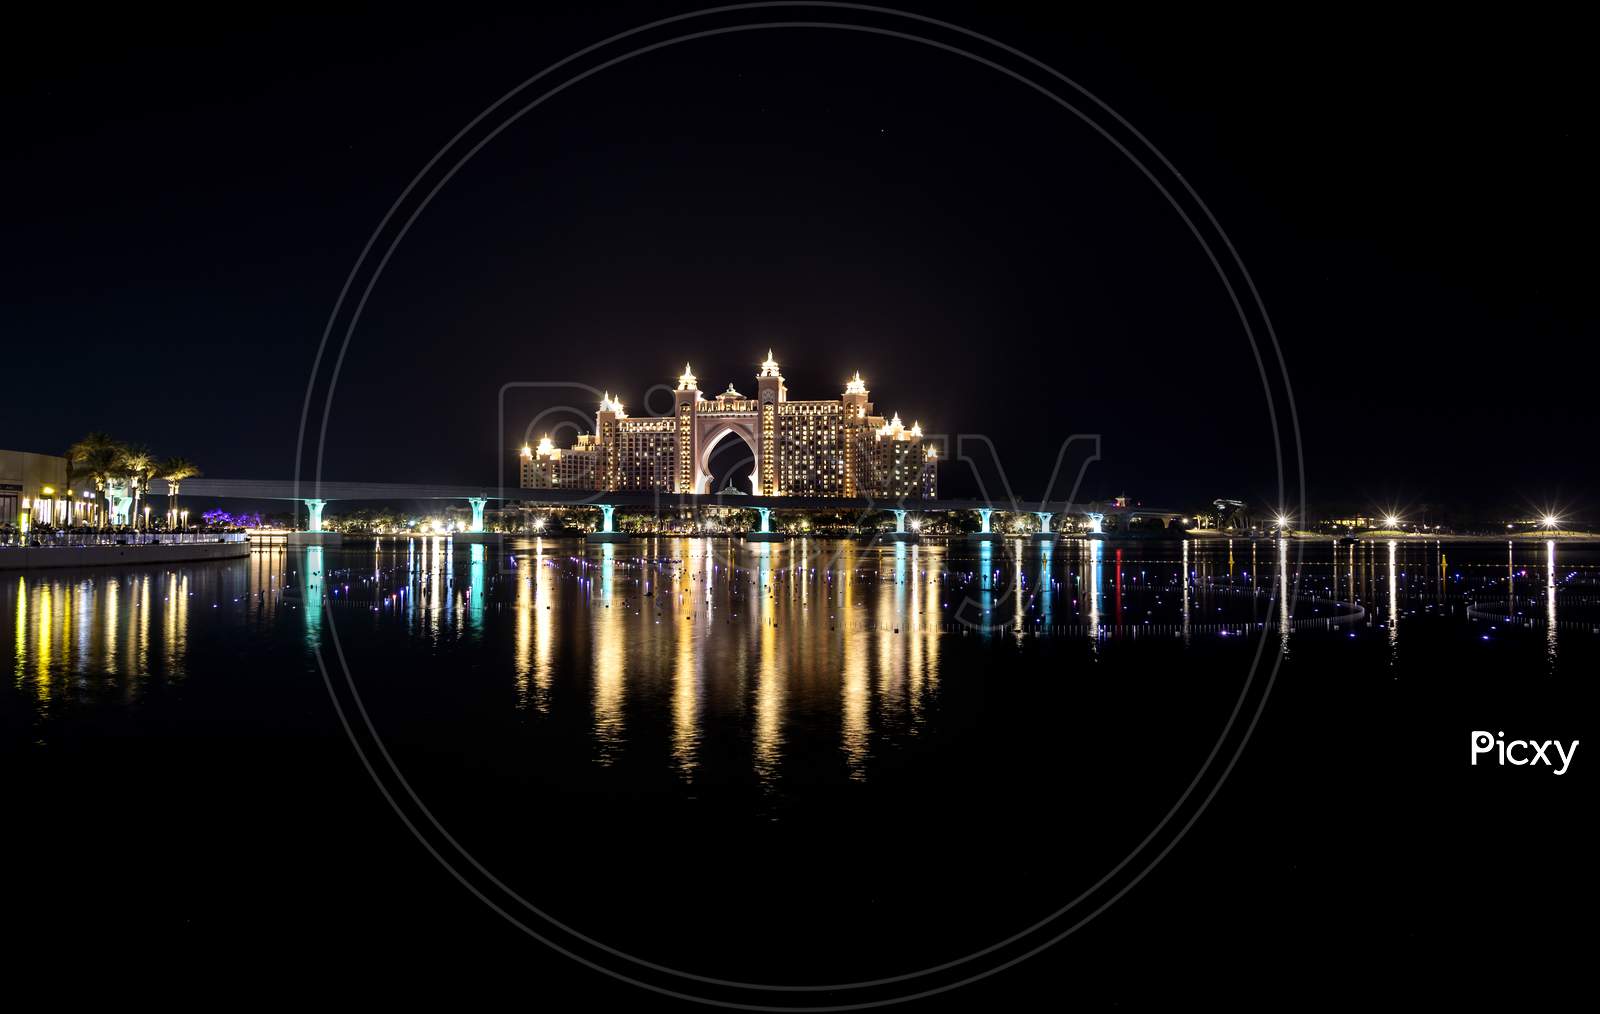 Dubai - Uae. 13Th November 2020. View Of The Atlantis Hotel With Colorful Reflection On Water From The Pointe Palm Jumeirah